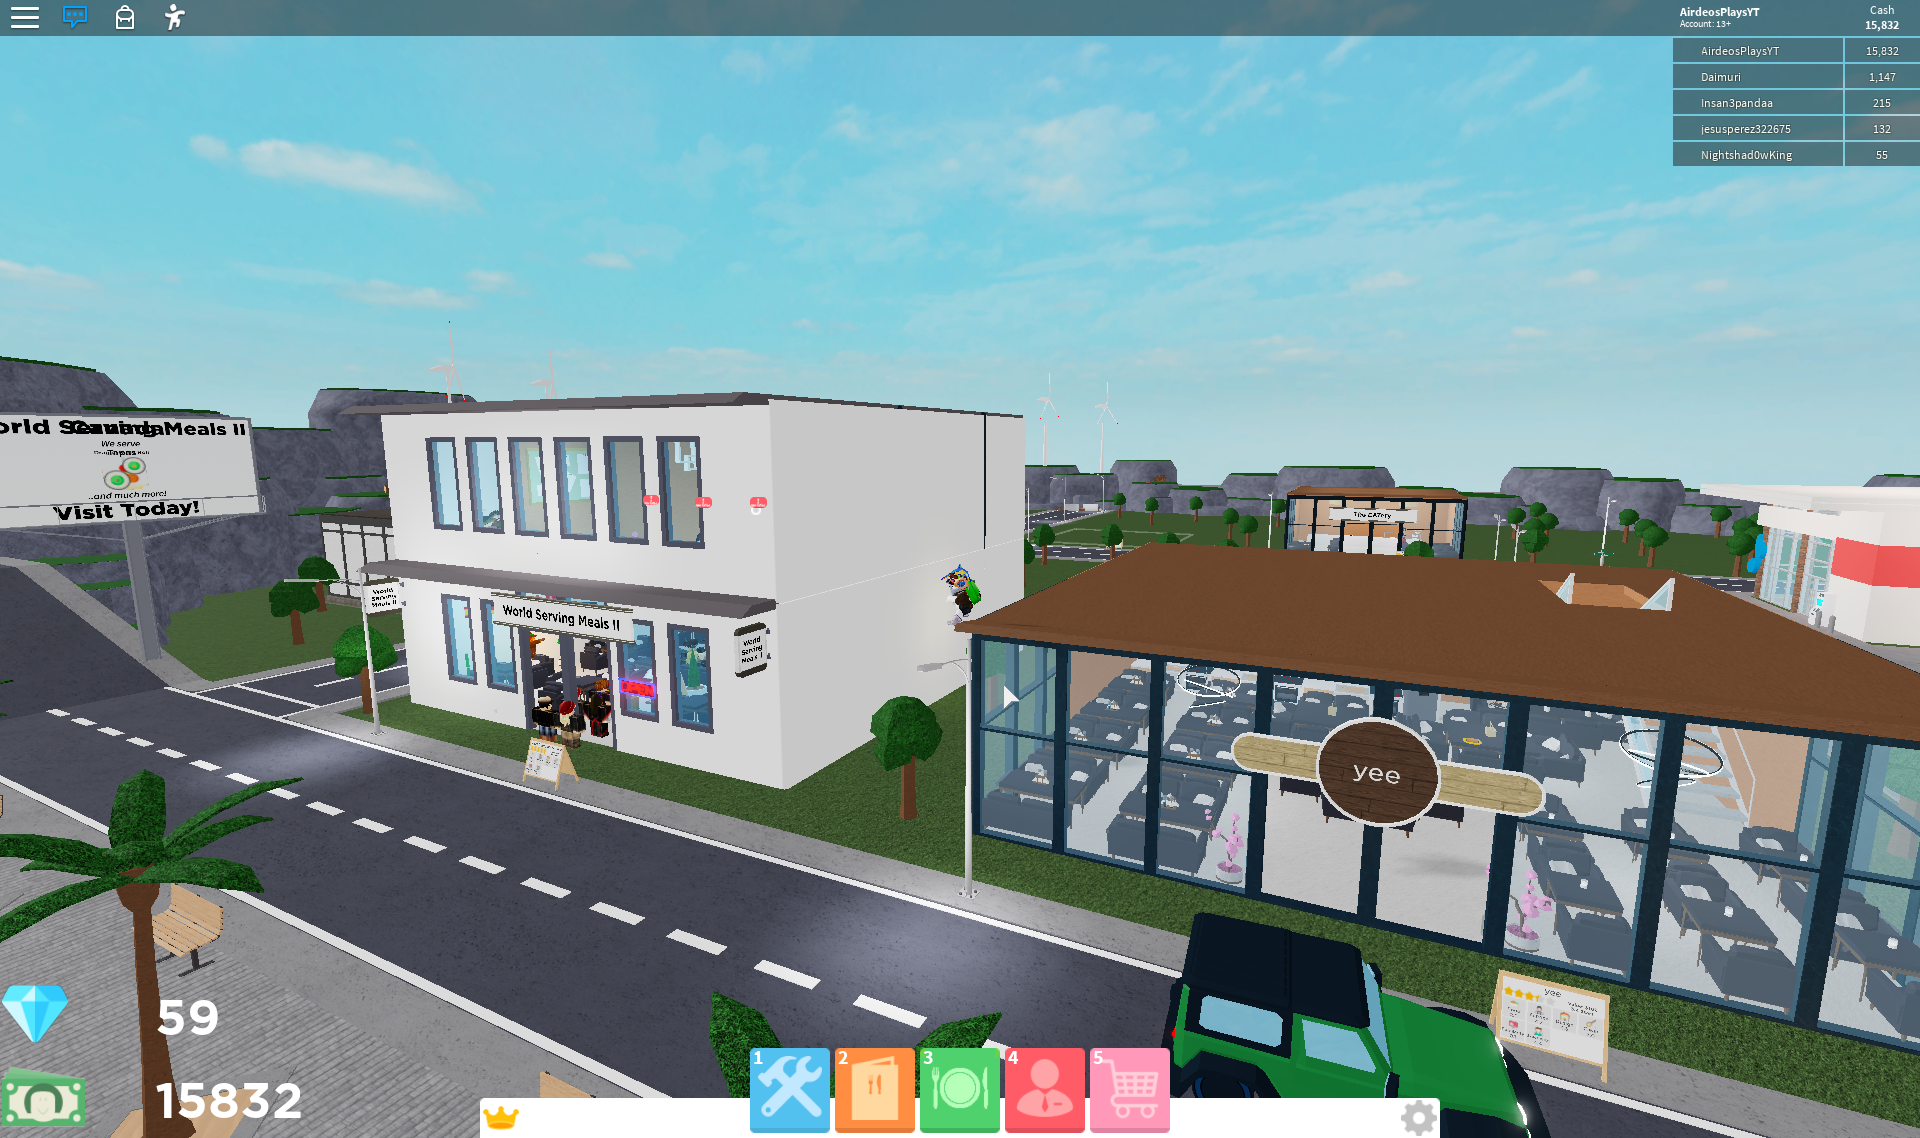 Upgrading Our Restaurant Again Roblox Restaurant Tycoon Roblox Games Downloads Free - all op working codes roblox restaurant tycoon 2